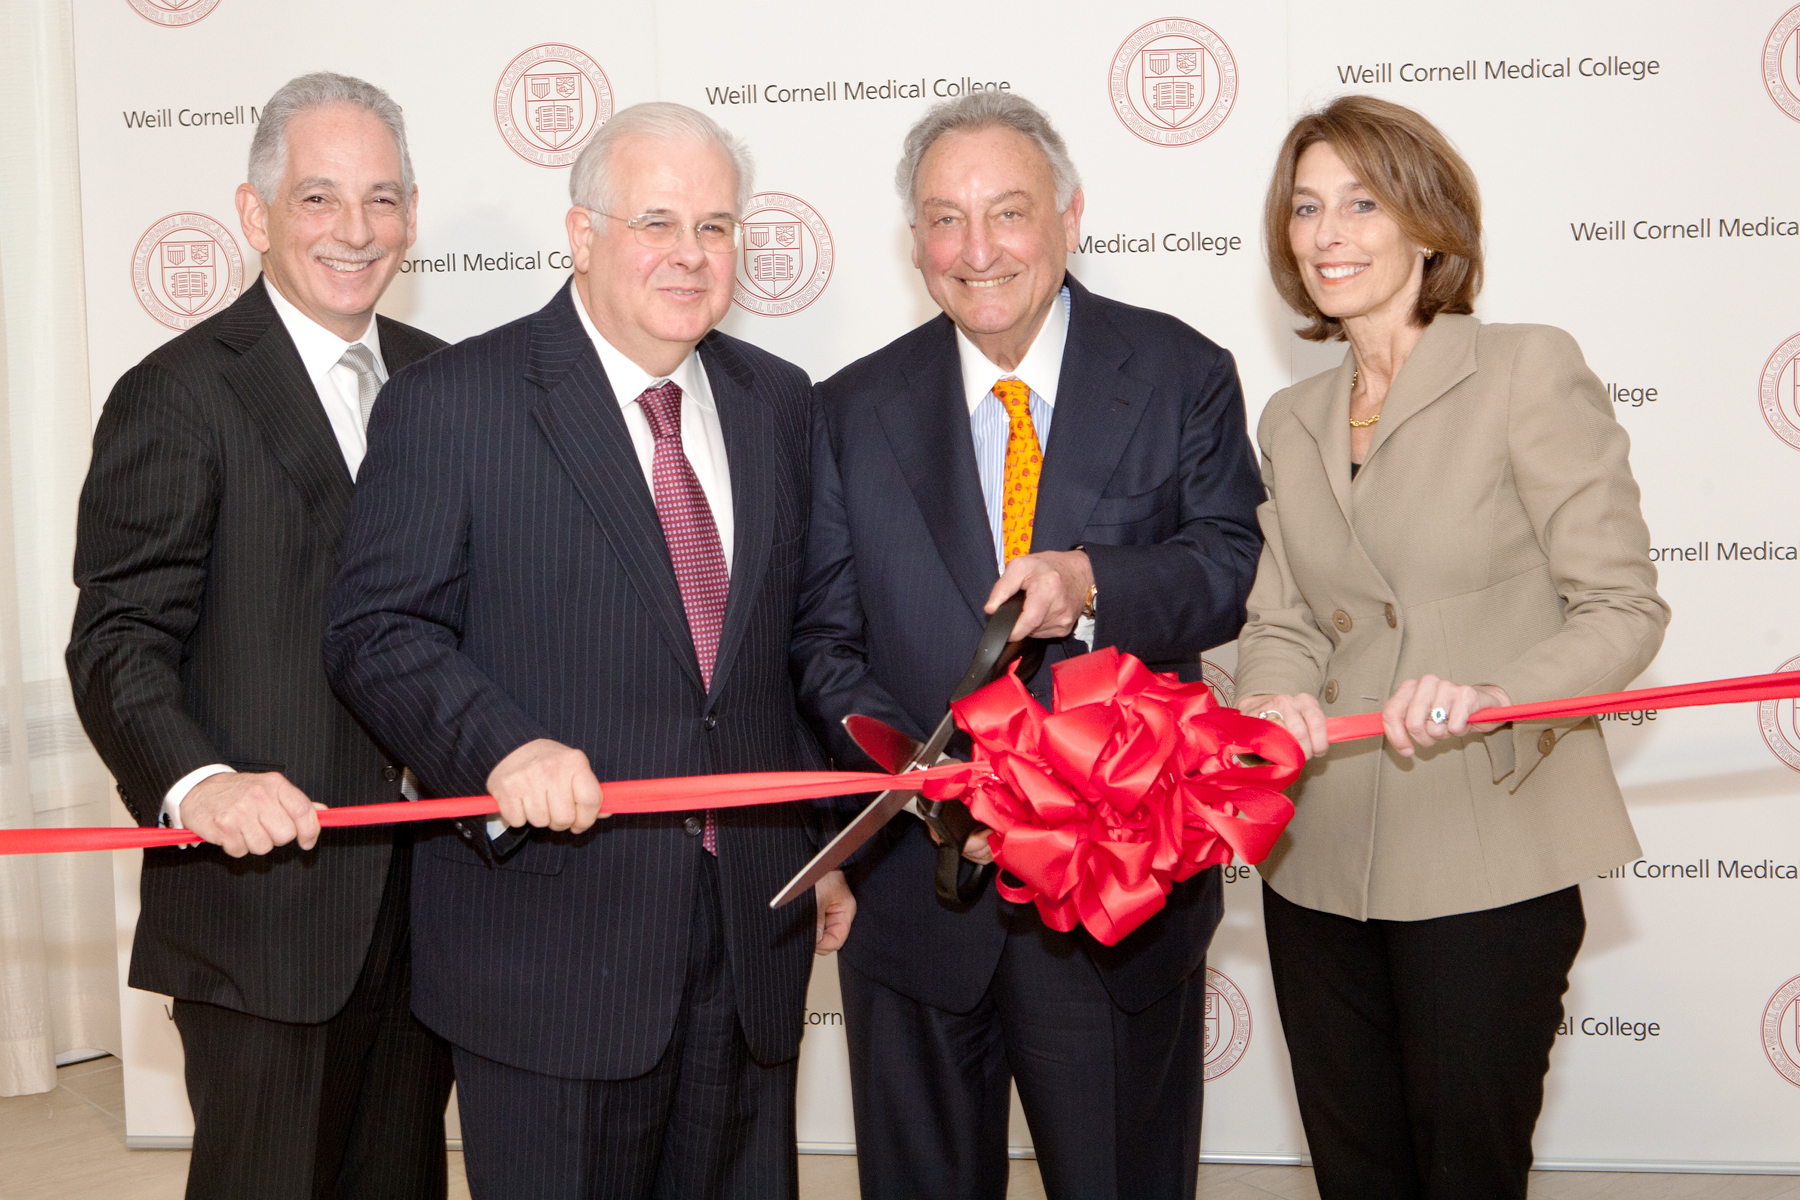 Dr. Steven J. Corwin, Dr. Daniel Knowles, Sanford I. Weill and Dr. Laurie H. Glimcher